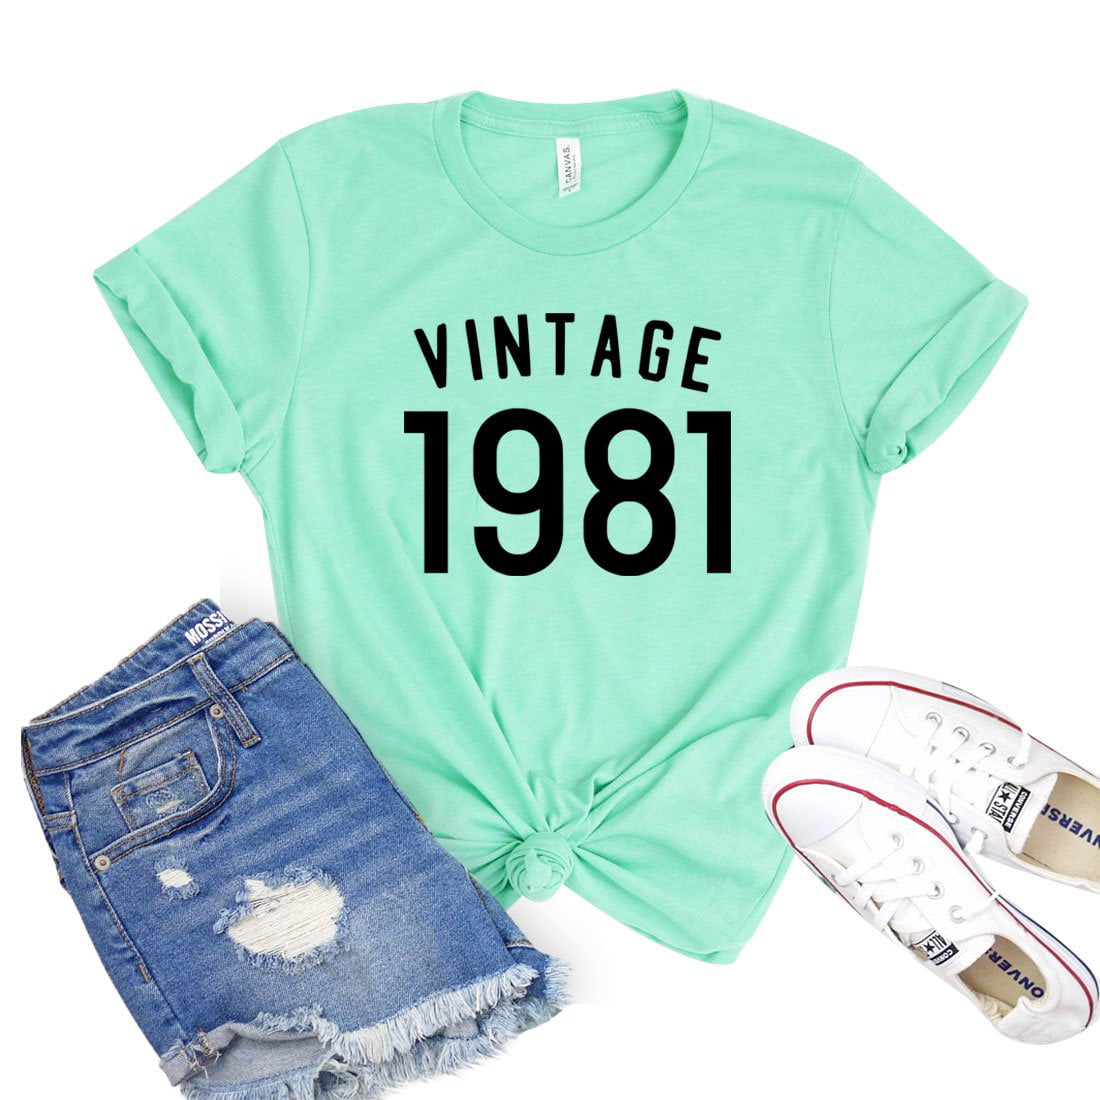 Large Vintage 1981 Graphic Her 40th Birthday 1981 Gift 40th Birthday Gift Retro 1981 Shirt Vintage 1981 Shirt Mom 40th birthday